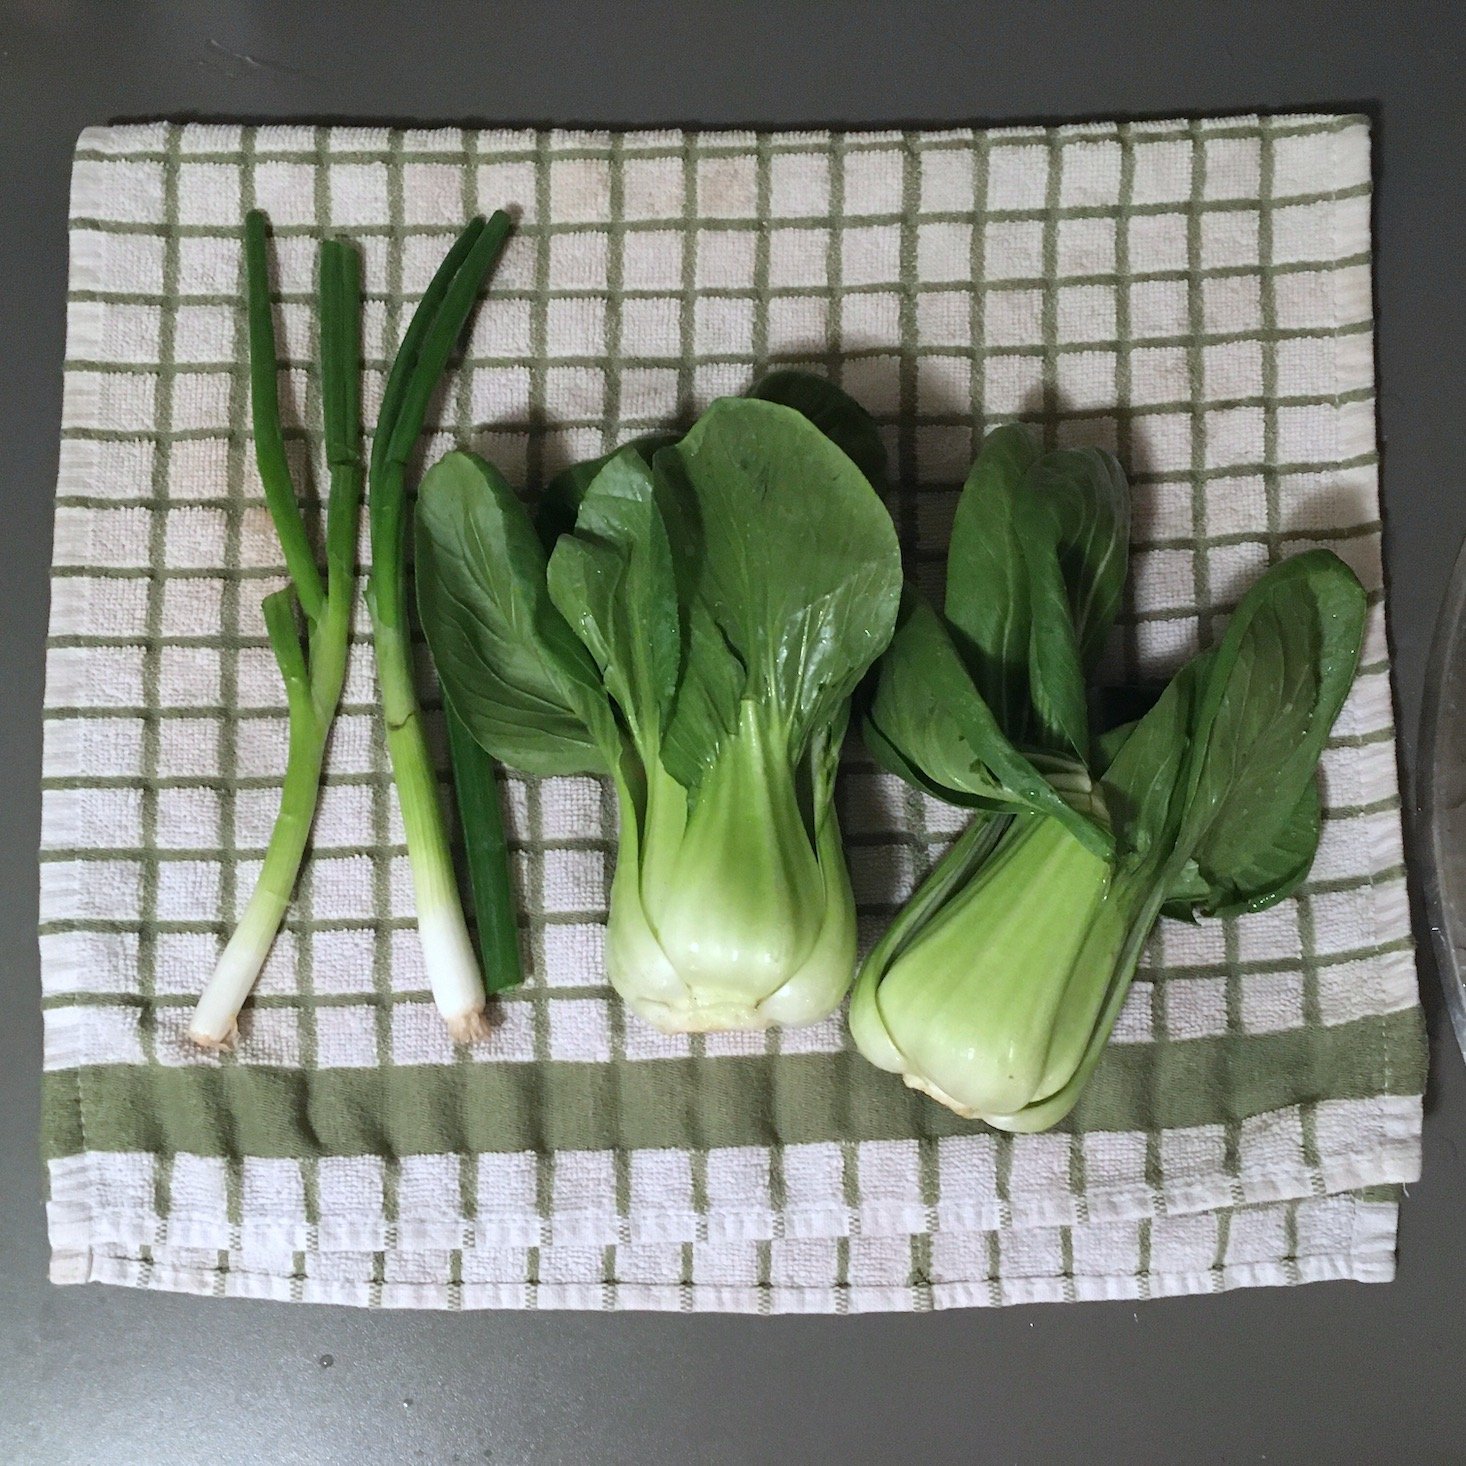 bok choy and scallions drying on kitchen towel